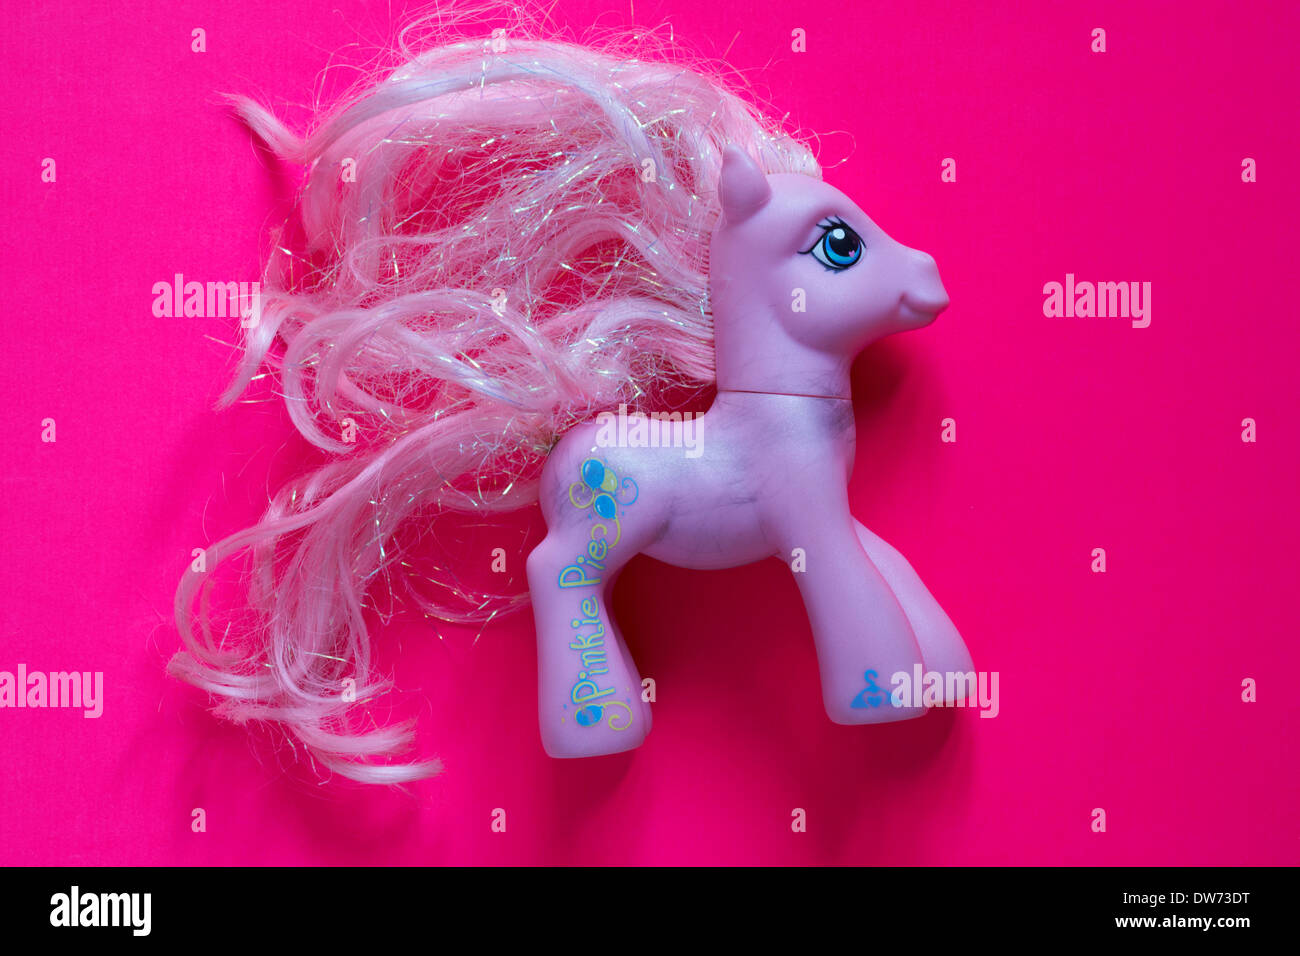 pinkie pie My little pony toy isolated on pink background Stock Photo -  Alamy